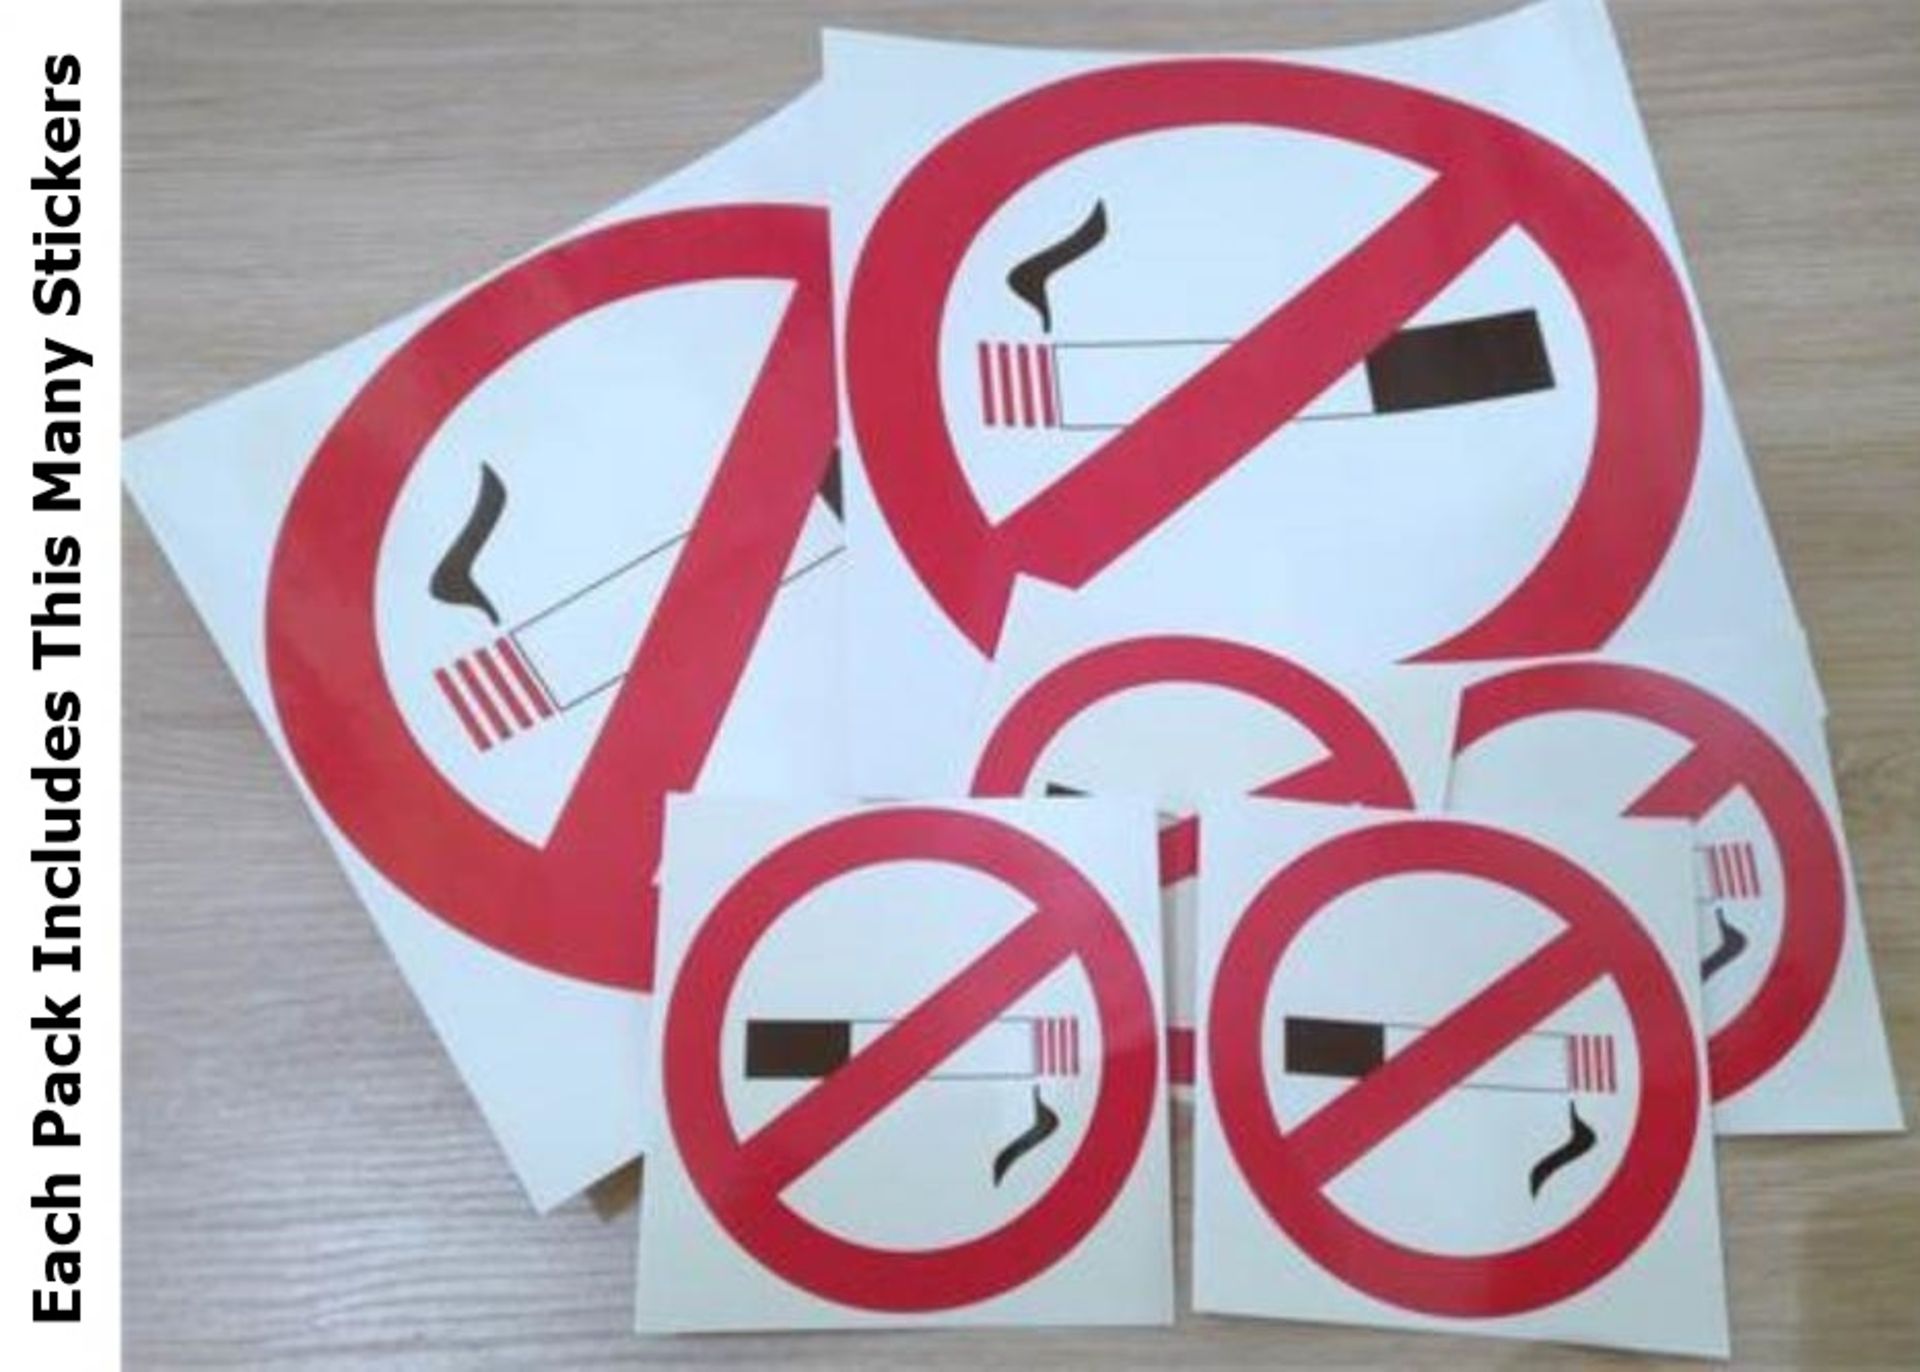 1 x Large Box of NO SMOKING STICKERS - Over 100 Brand New Multi Packs of Stickers Including Small - Image 2 of 6